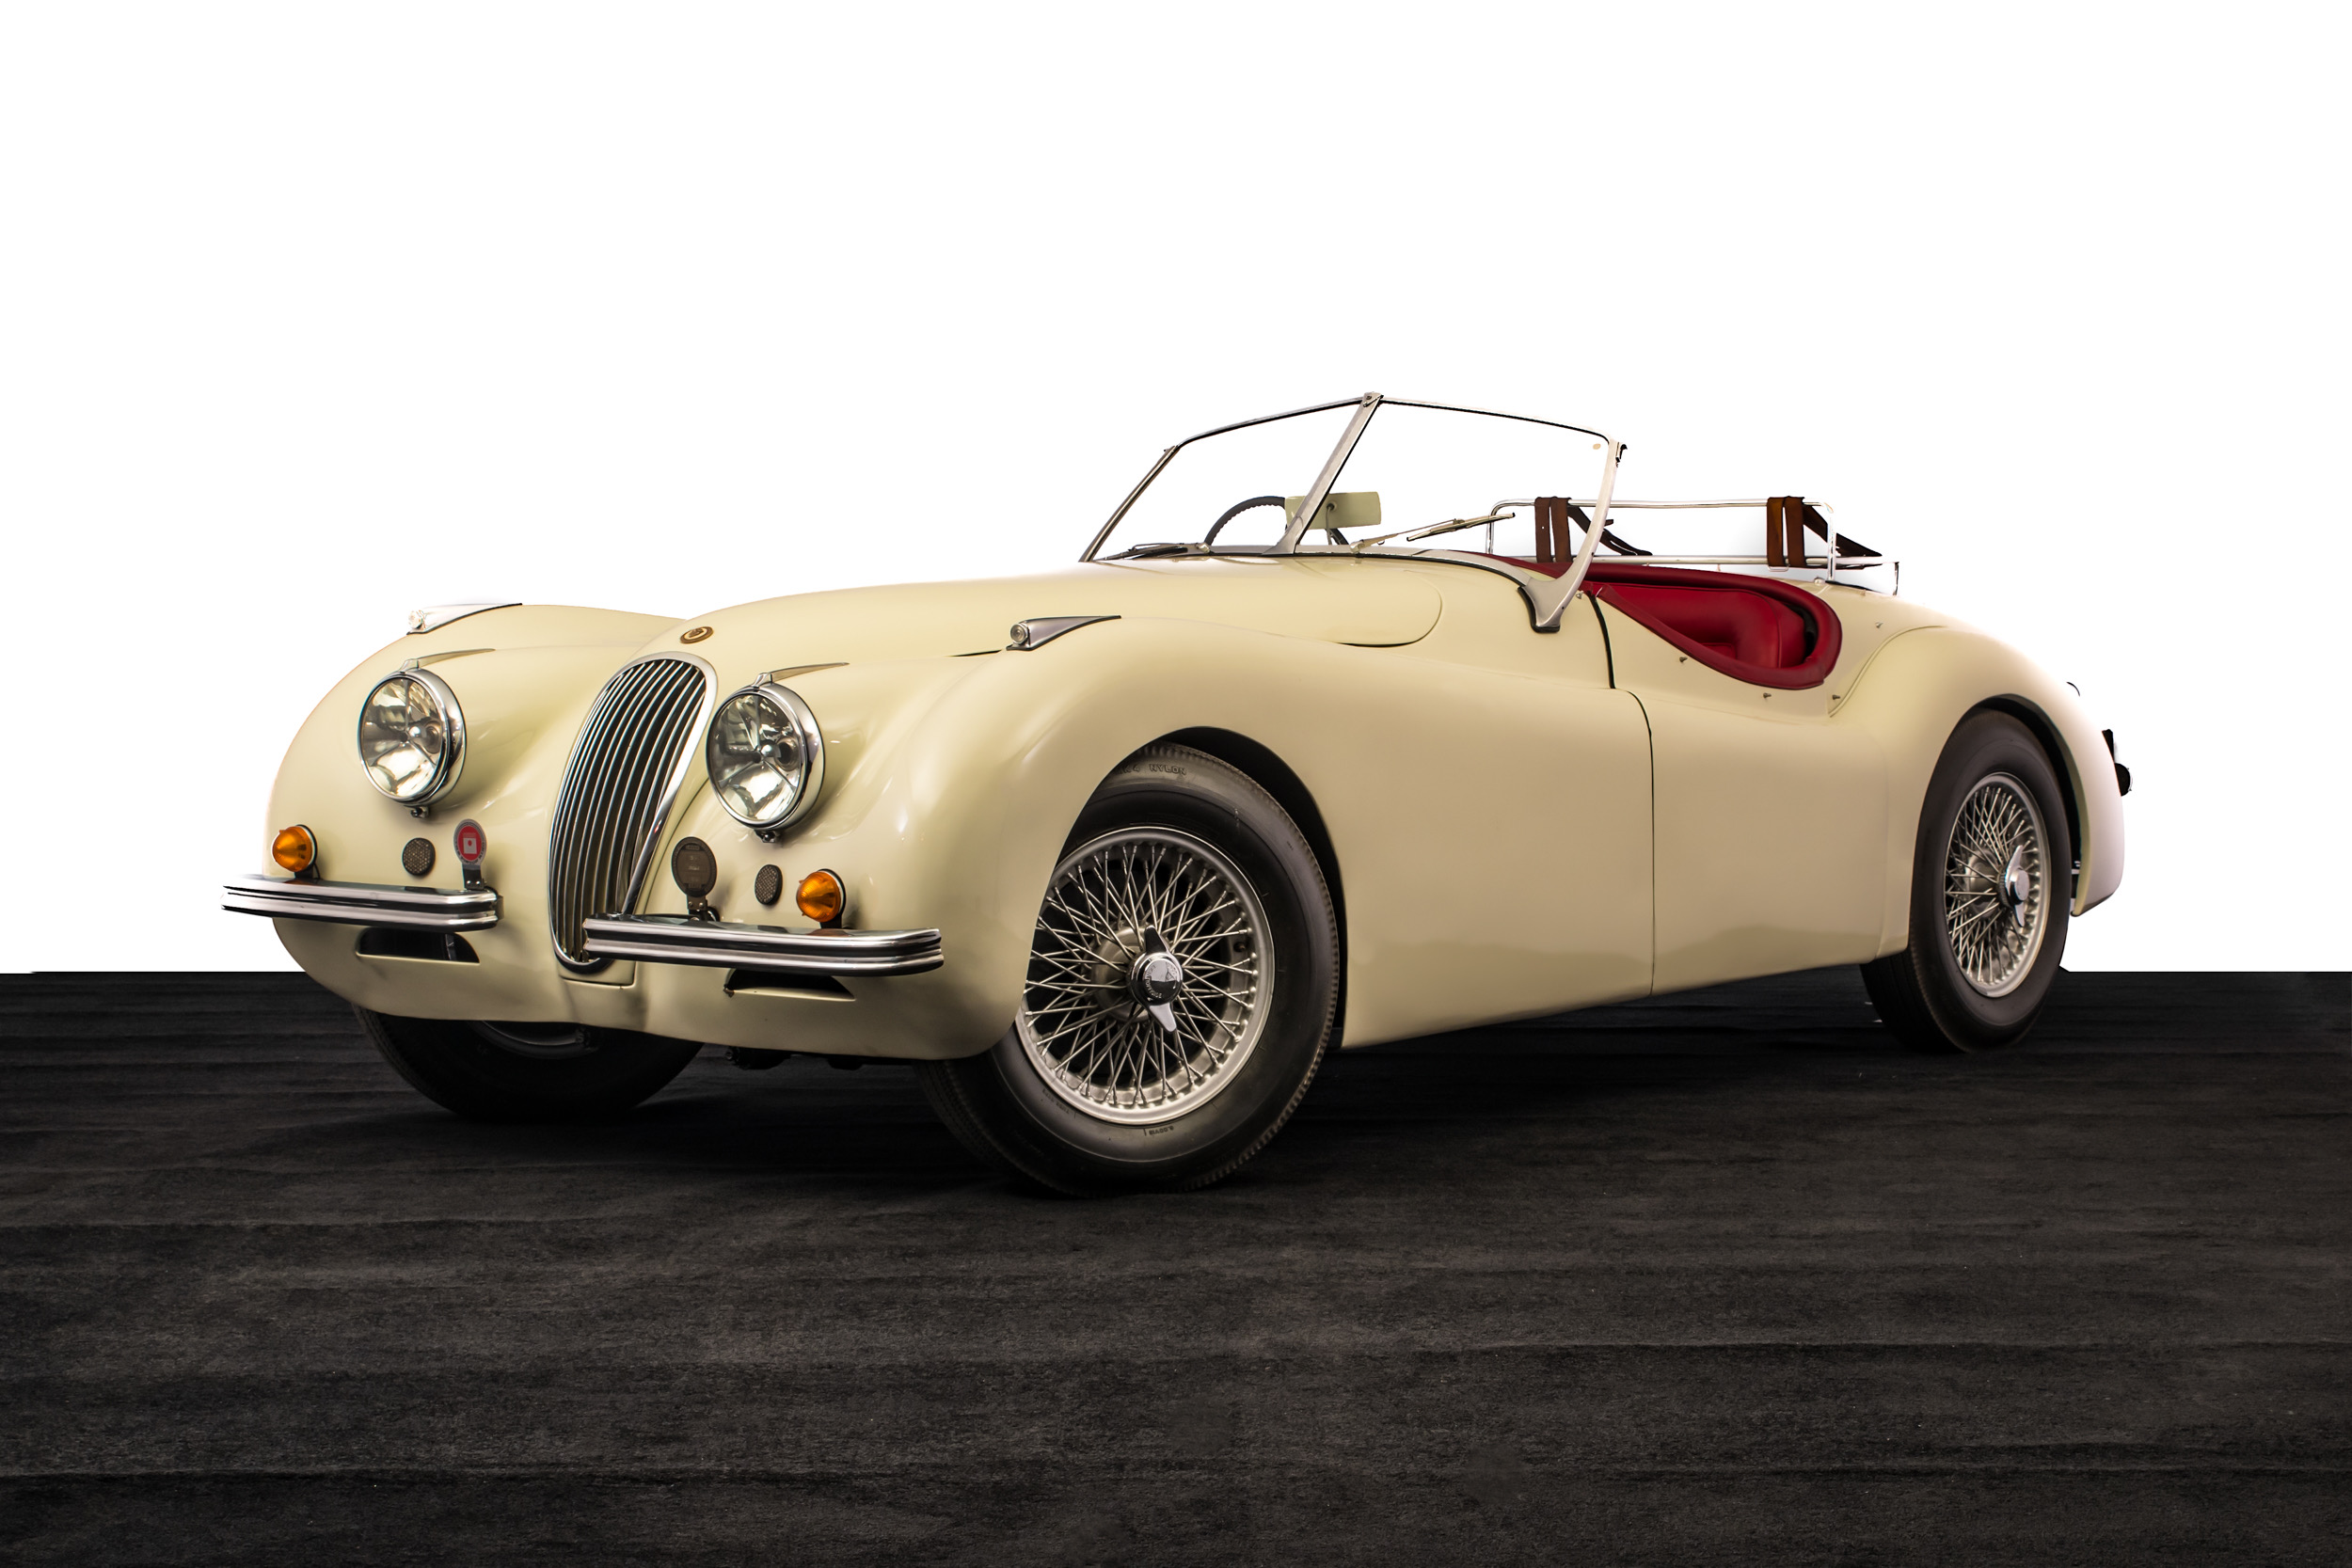 South Africa, Coys sets auction with Concours South Africa, ClassicCars.com Journal